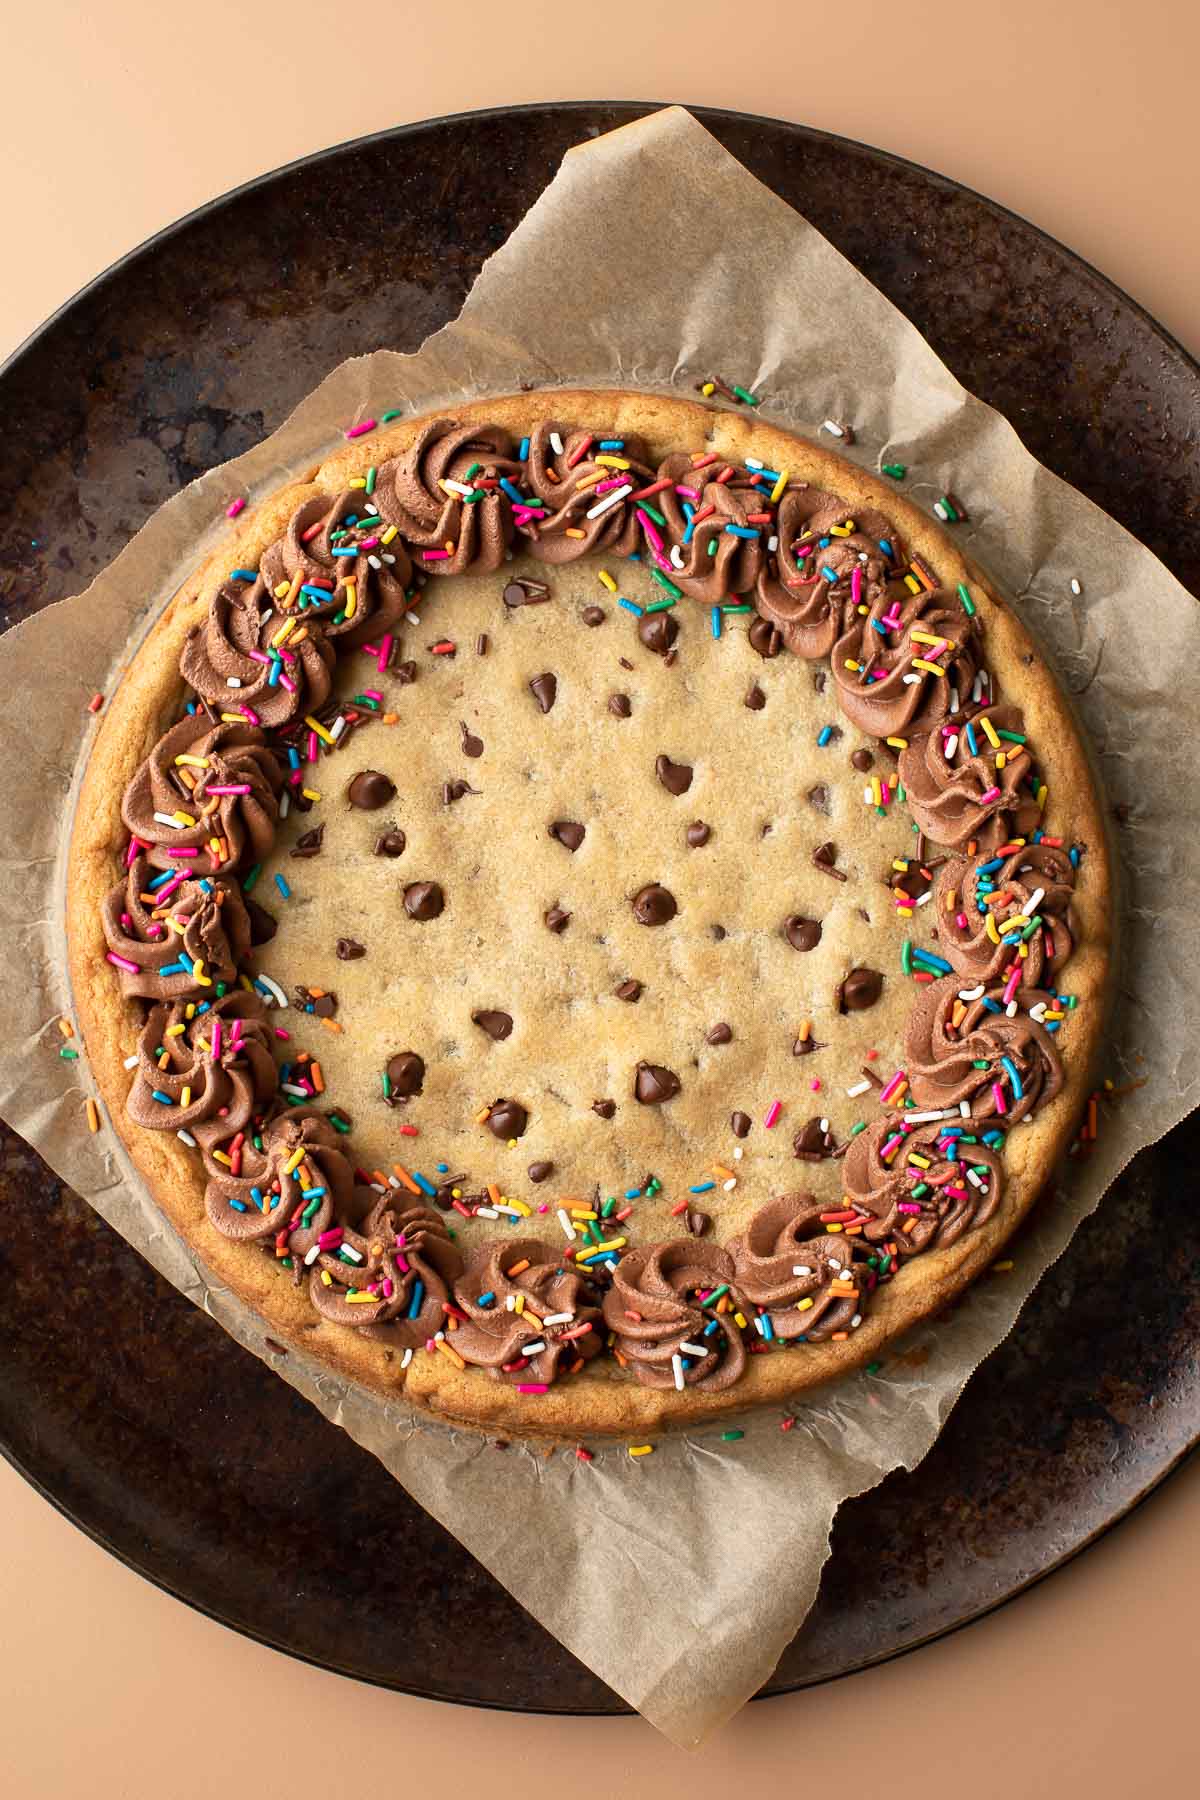 Homemade Cookie Cake with Chocolate Fudge Frosting and Sprinkles